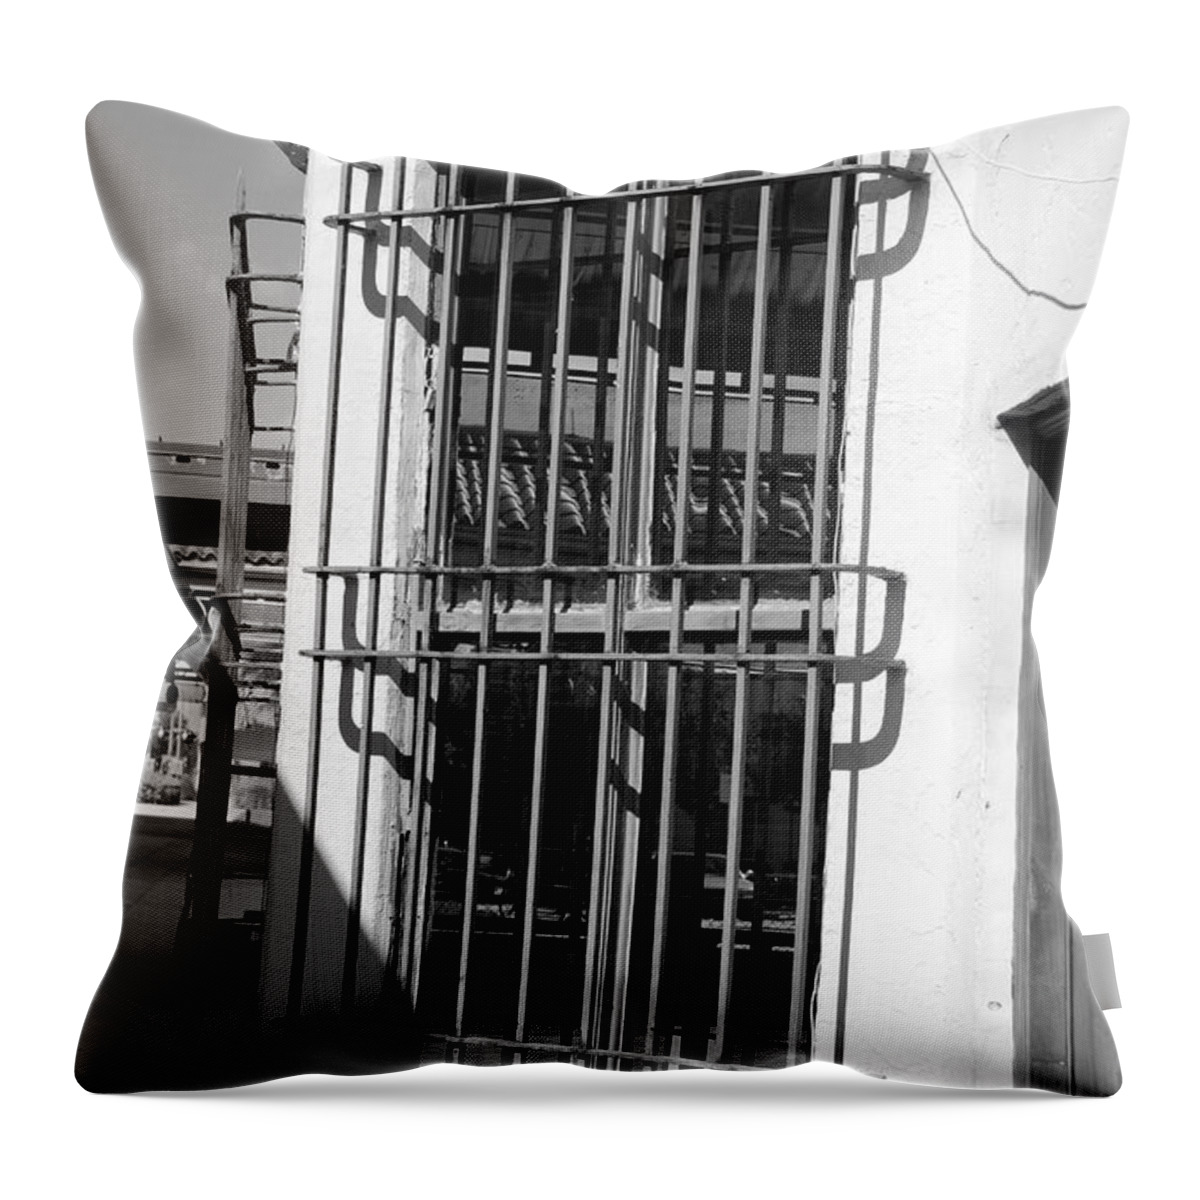 Train Station Throw Pillow featuring the photograph Bars by Rob Hans